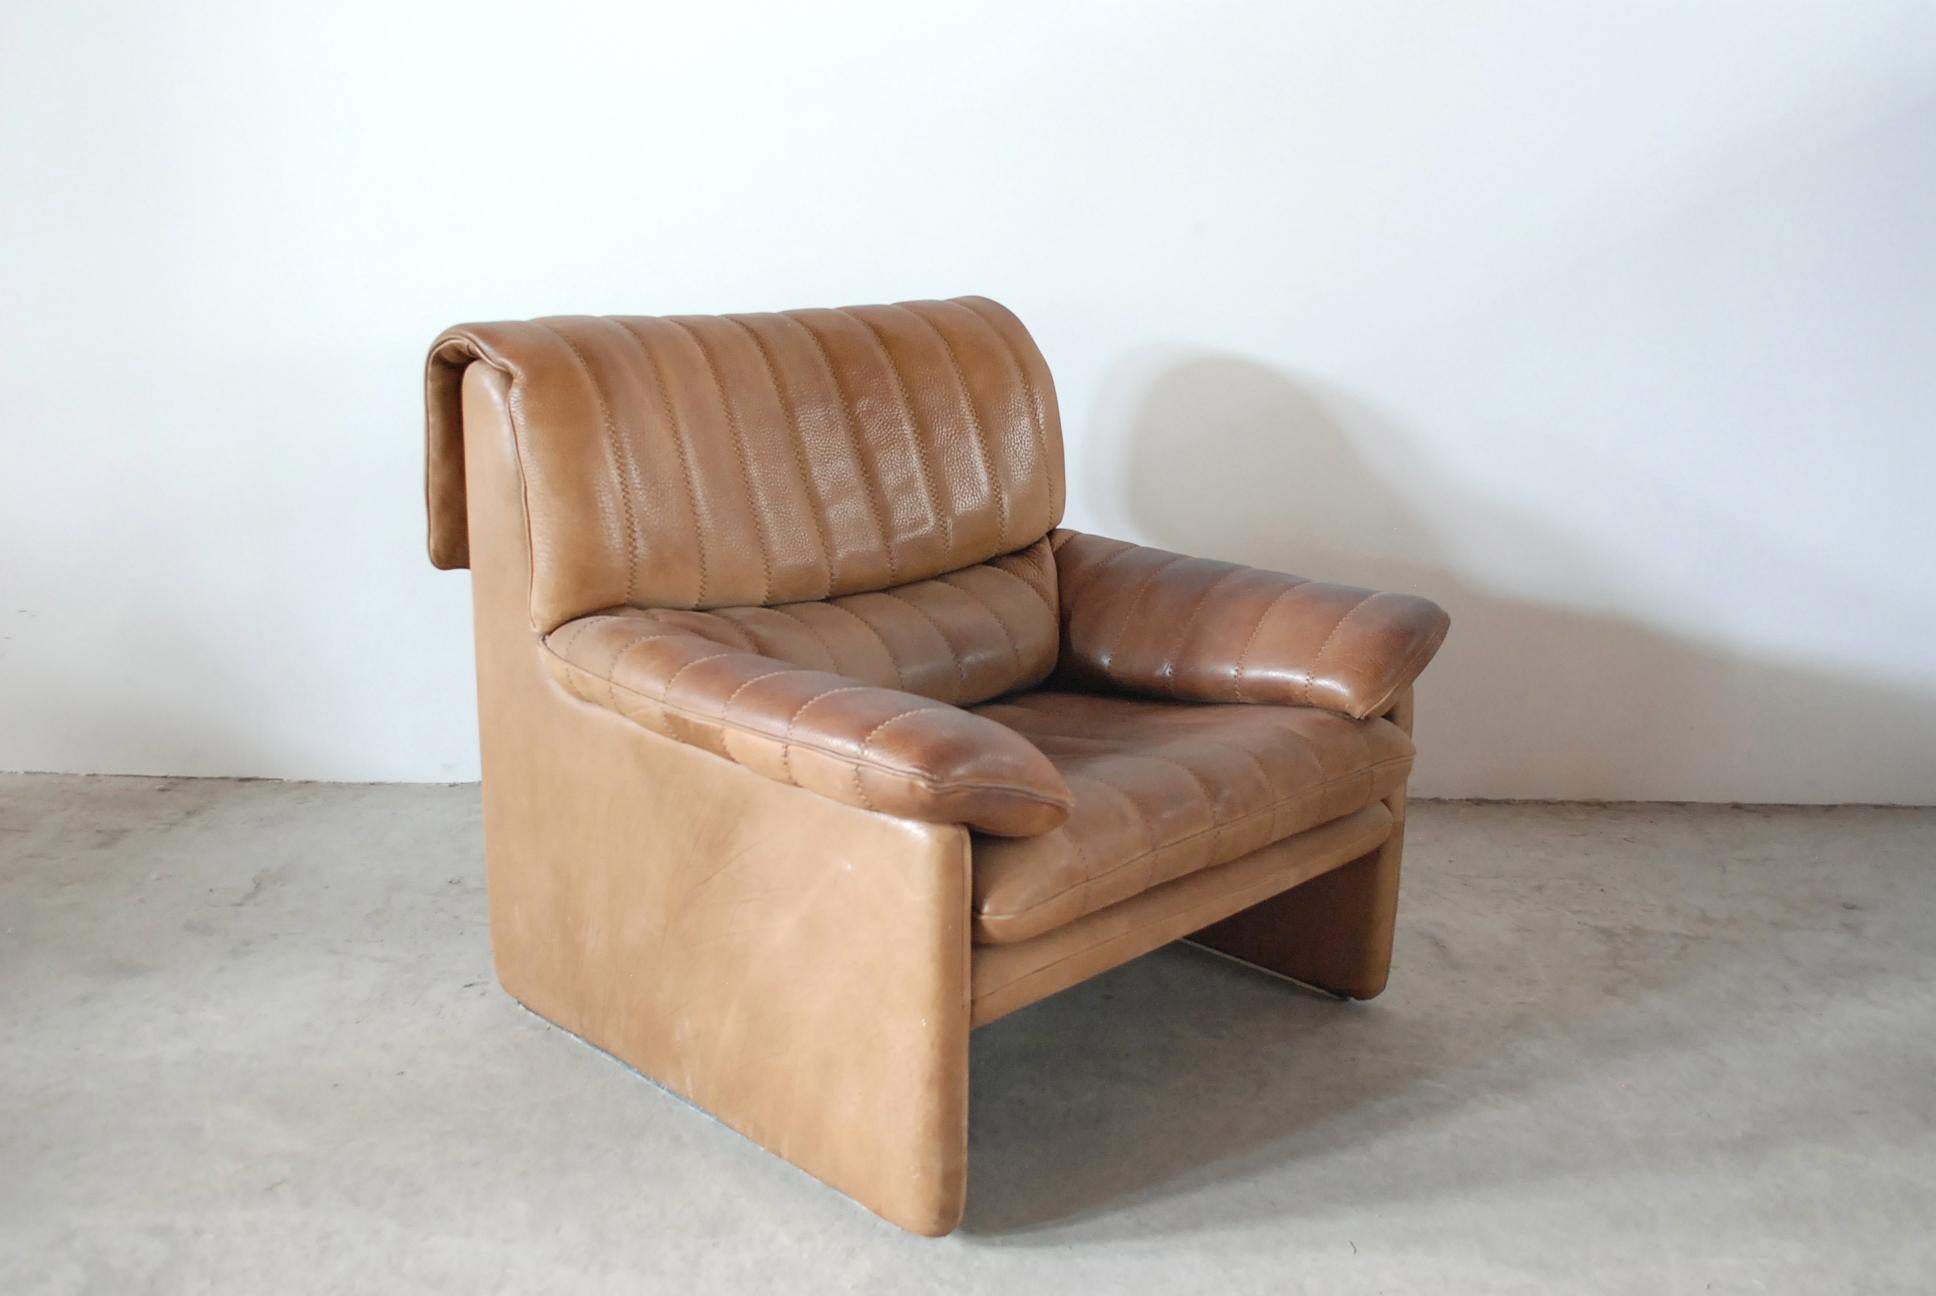 Vintage leather armchair by De Sede.
Model Ds 86.Thick neck leather with bright nature brown color.
Great comfort.
With patina on the armrests and seat.
3 chairs are available in this color.